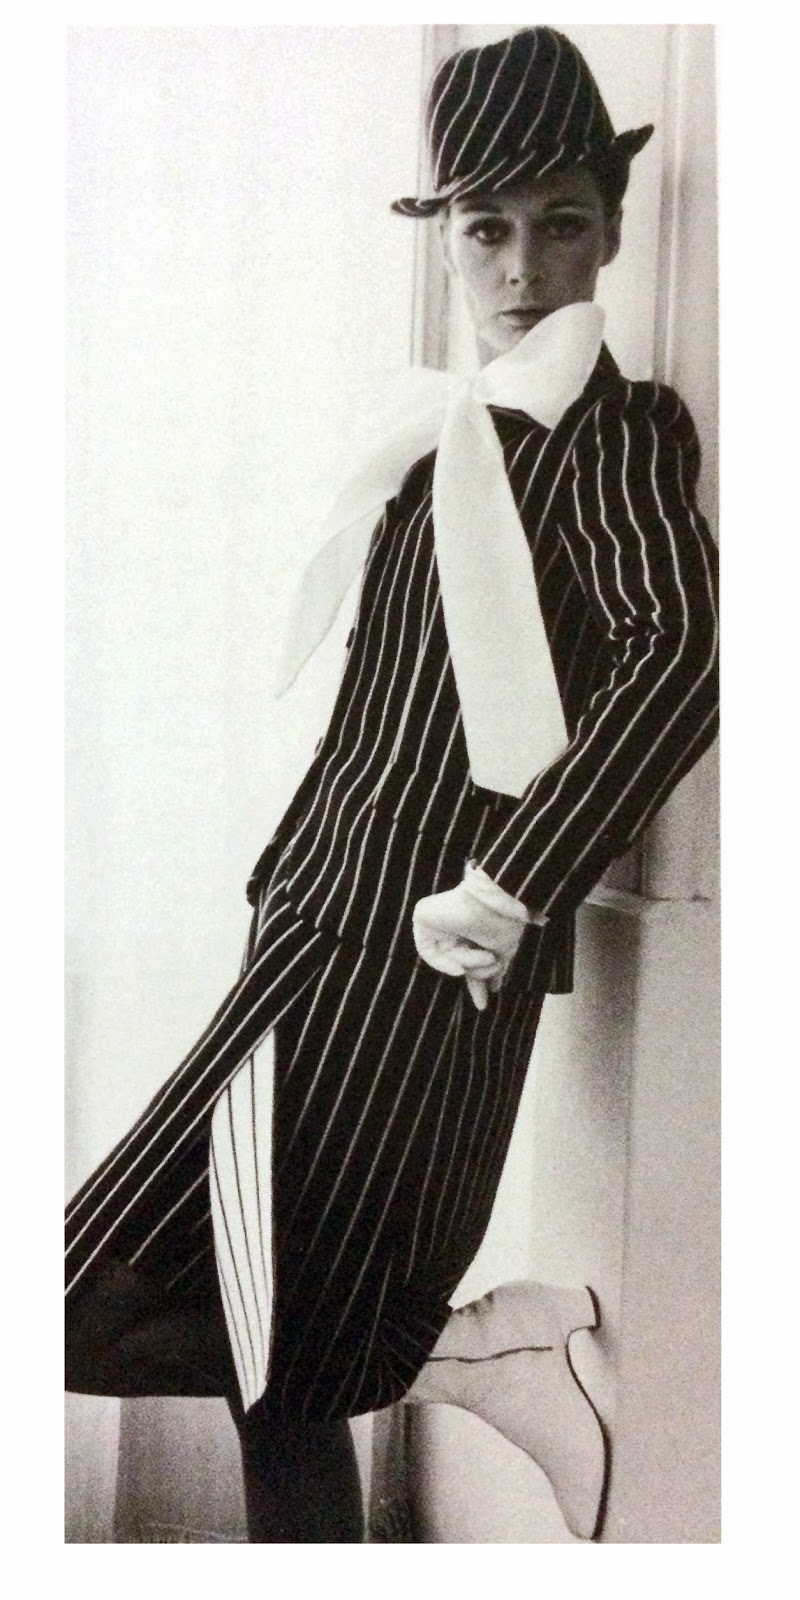 Sewing the 60s: 60's Fashion elements - The gritty and glamorous 1930's